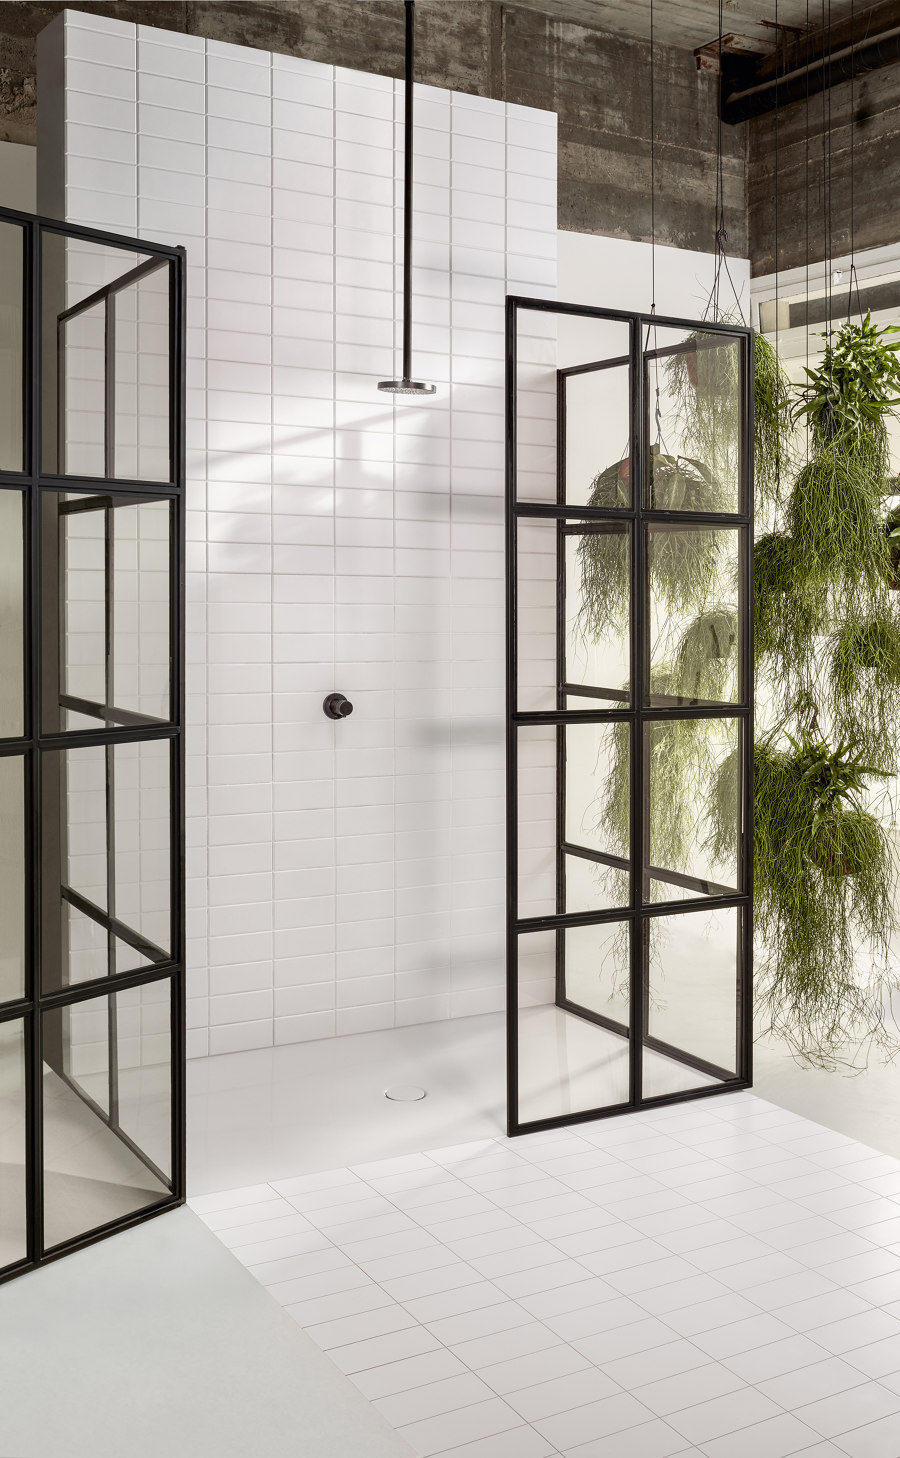 Everything flows: Baths from BETTE | Novedades